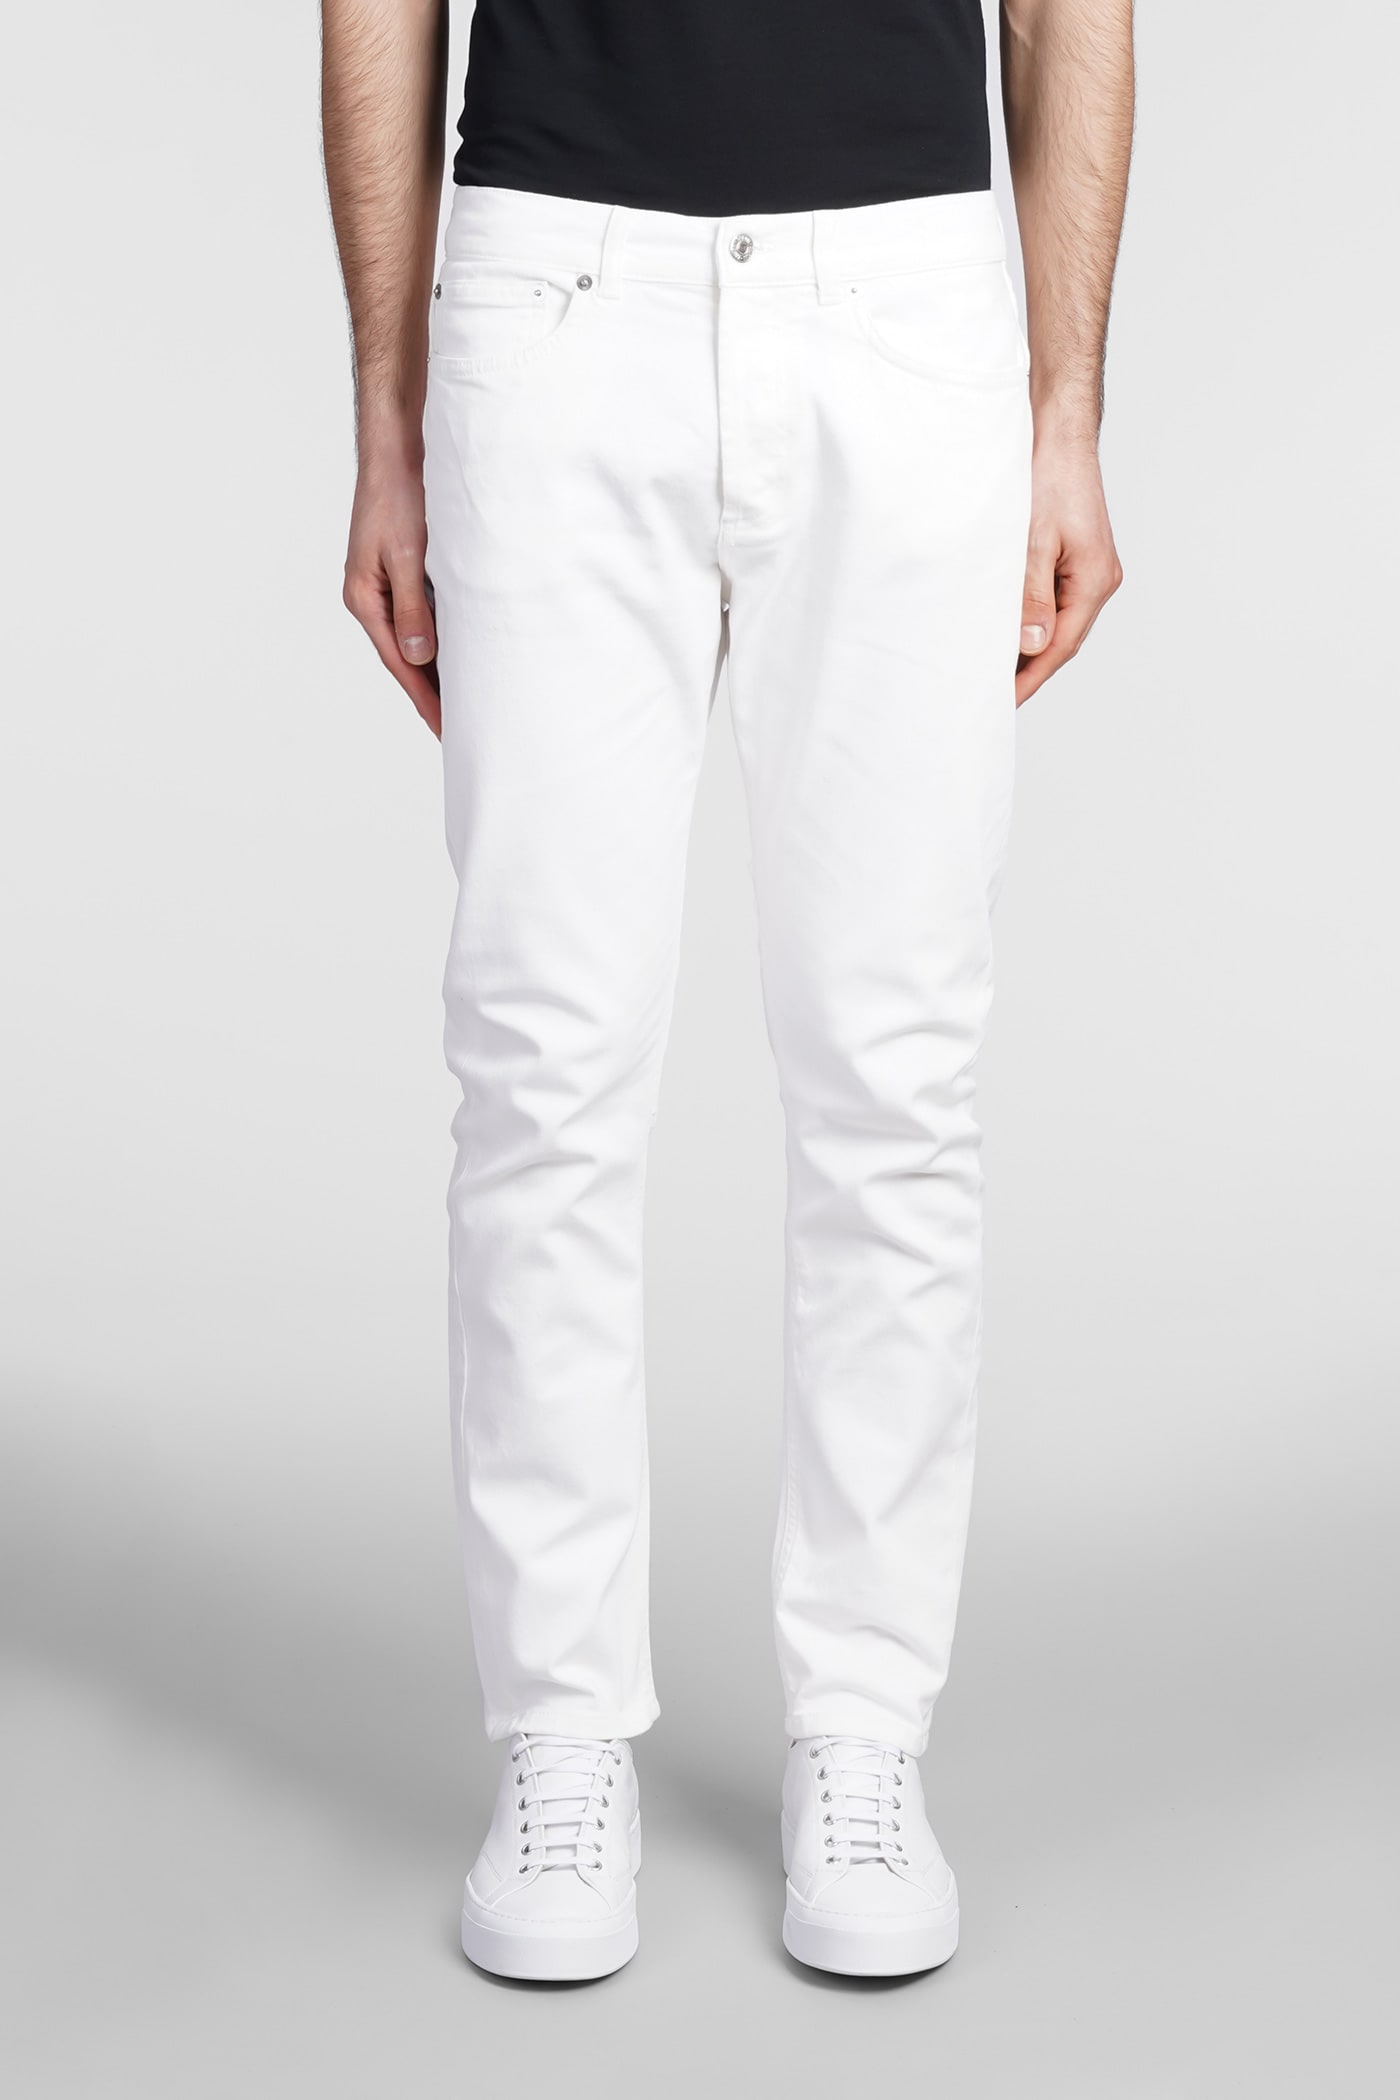 MAURO GRIFONI JEANS IN WHITE COTTON